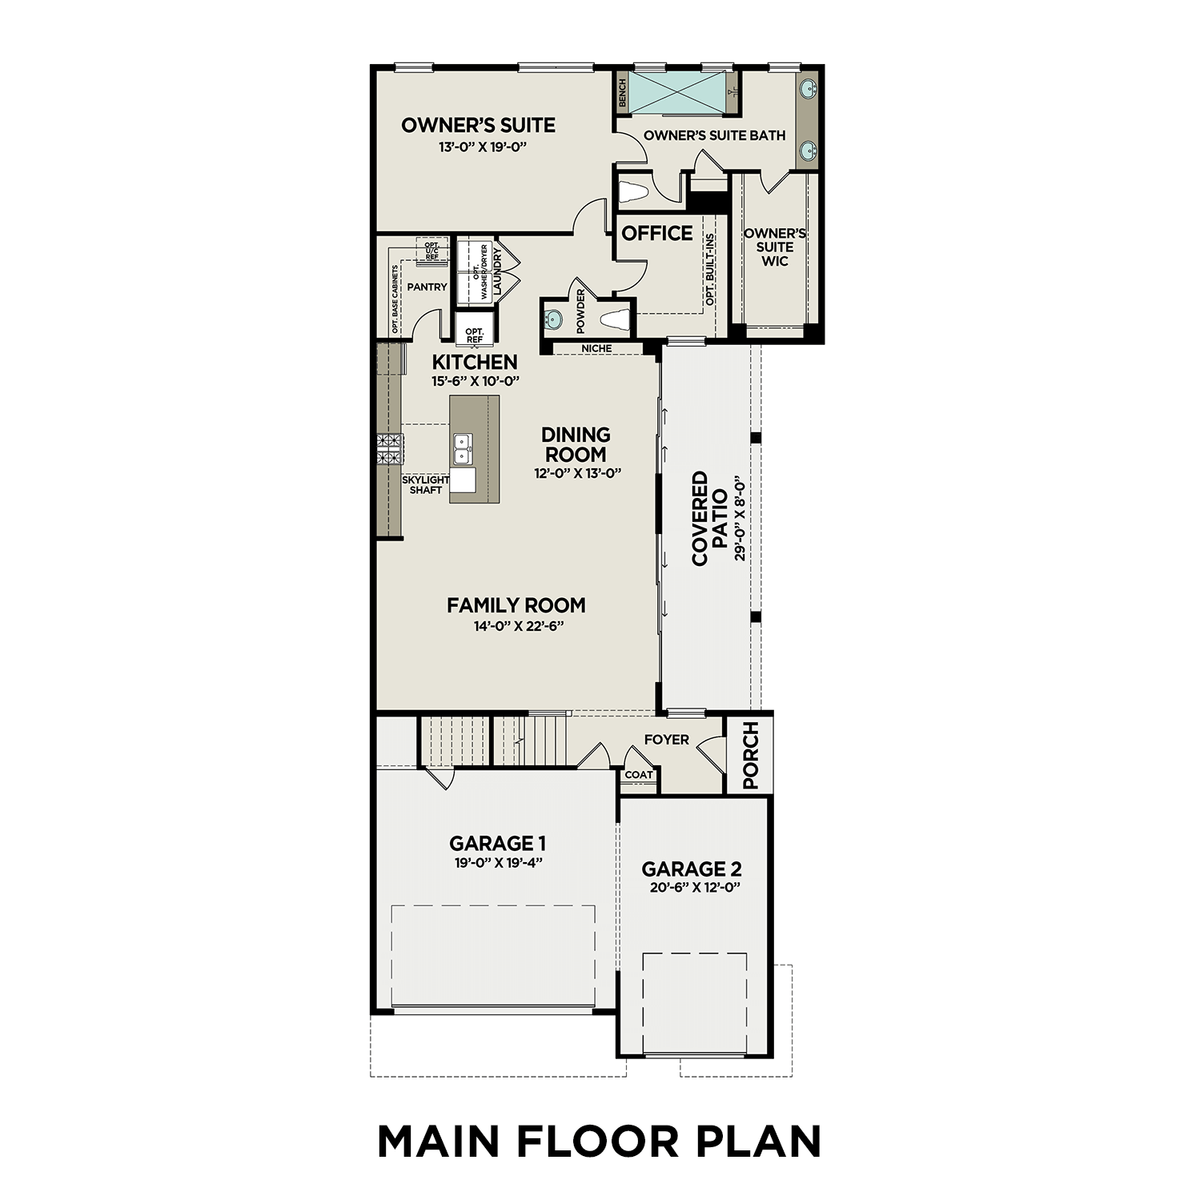 1 - The Rosemary Beach A buildable floor plan layout in Davidson Homes' The Village at Towne Lake community.